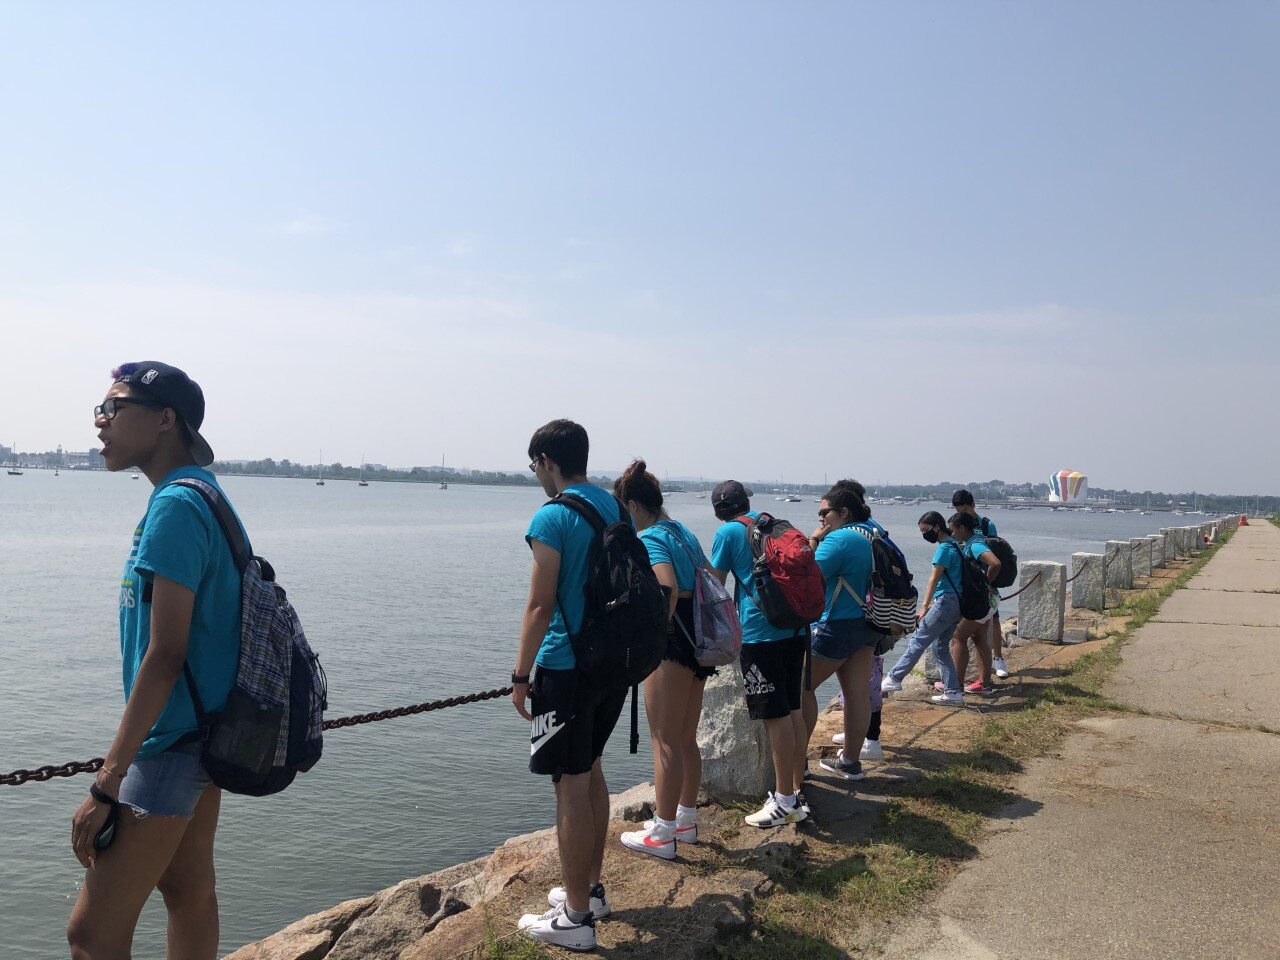  This image of the Waterfront Ambassadors was taken at UMass Boston on our tour with Patricio. We learned about how climate change and environmental justice are connected to many other issues like poverty. -Priya 